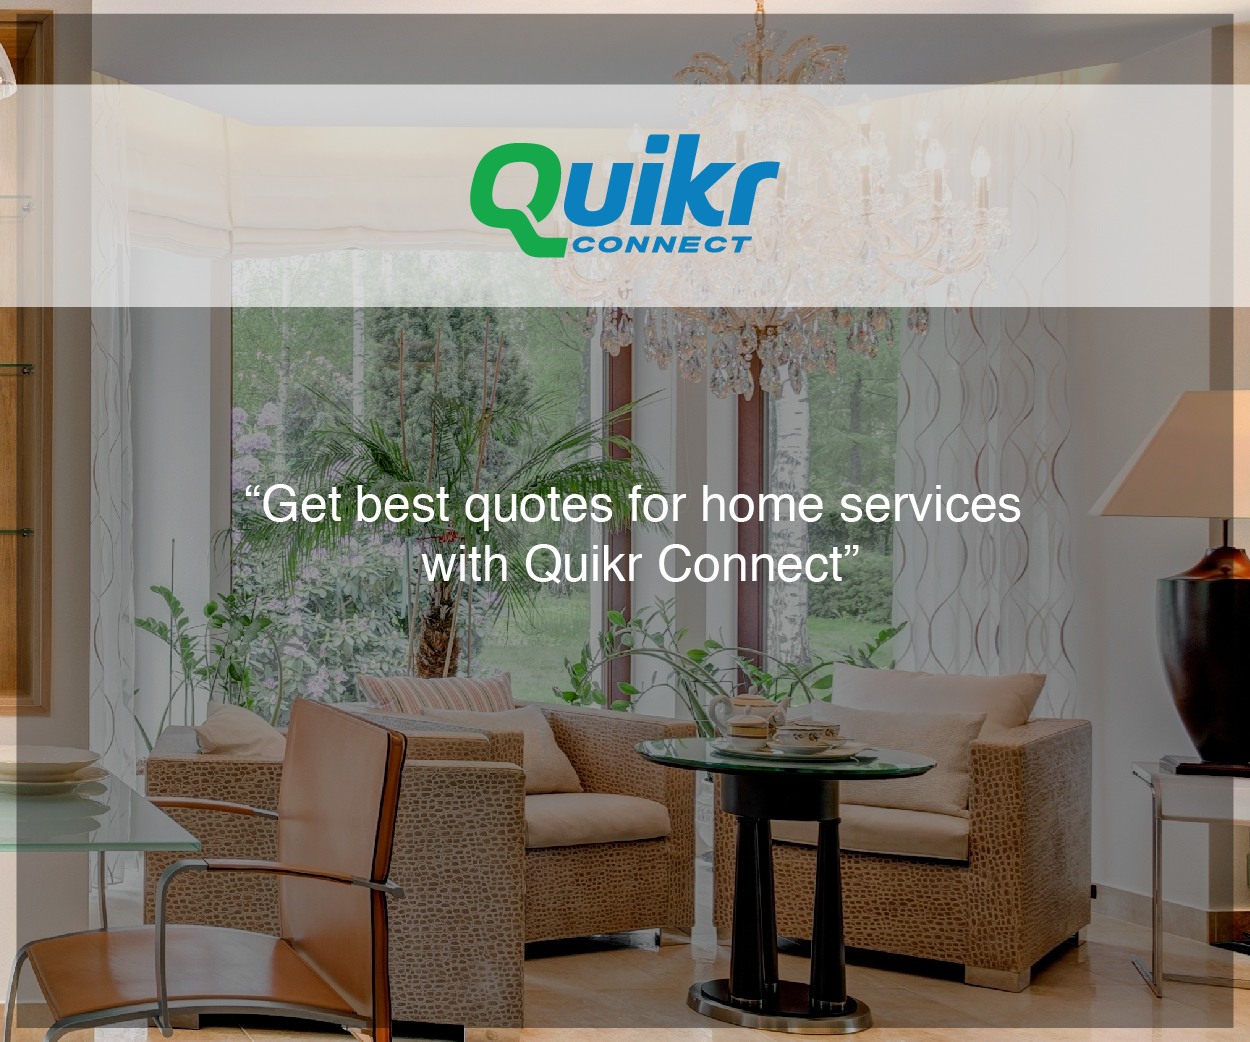 Quikr Connect – Find Right Service Professional in a Nick of Time.